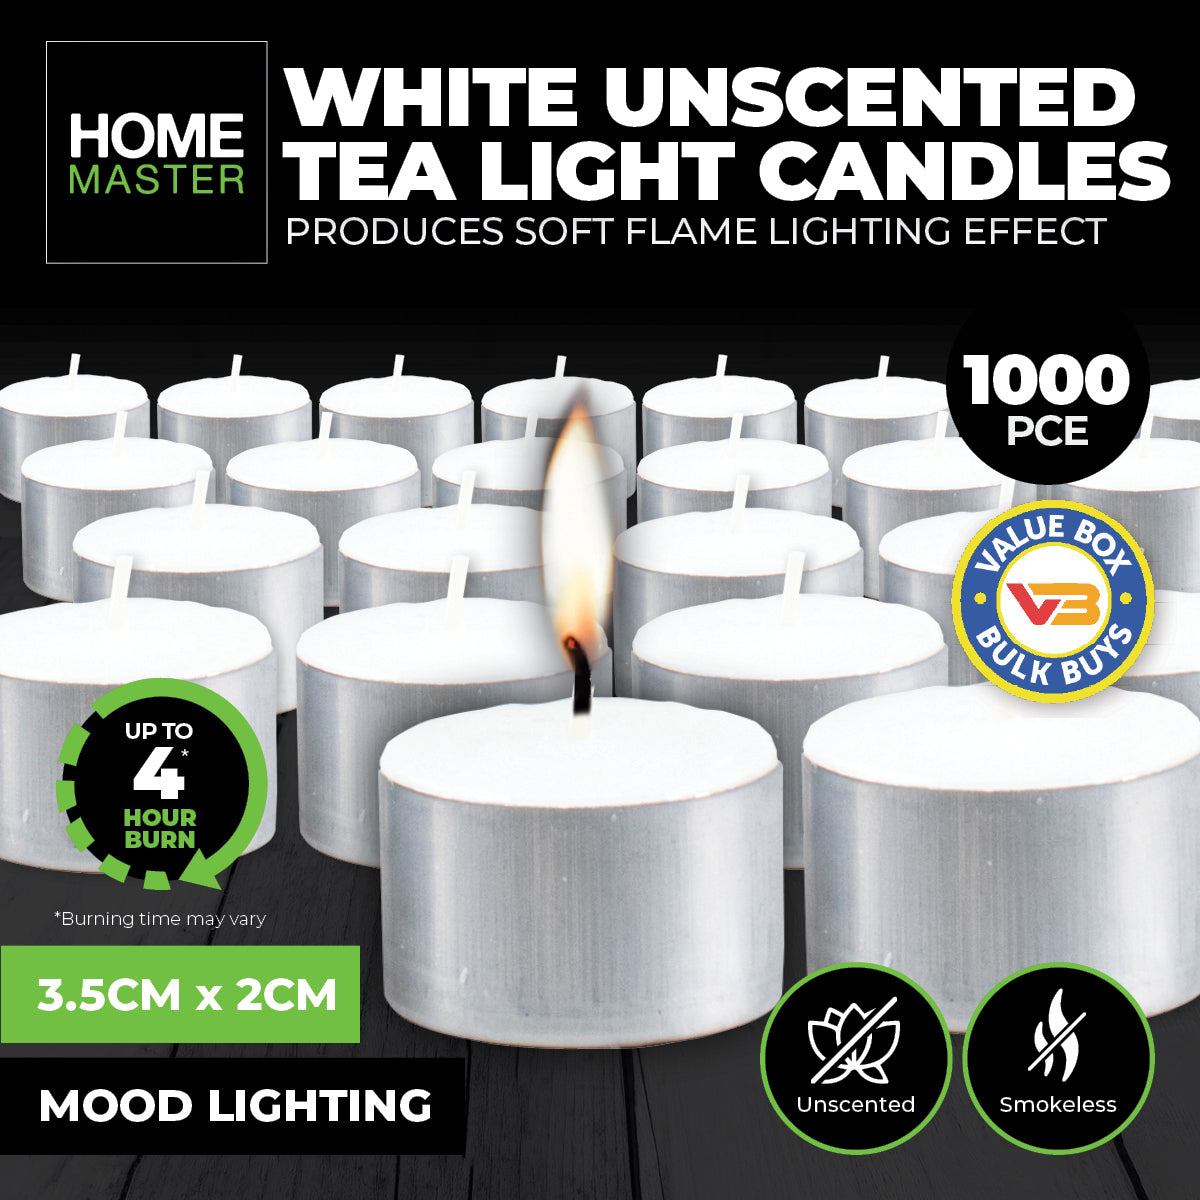 Home Master 1000PCE Unscented Tealight Candles Home Décor Party Wedding